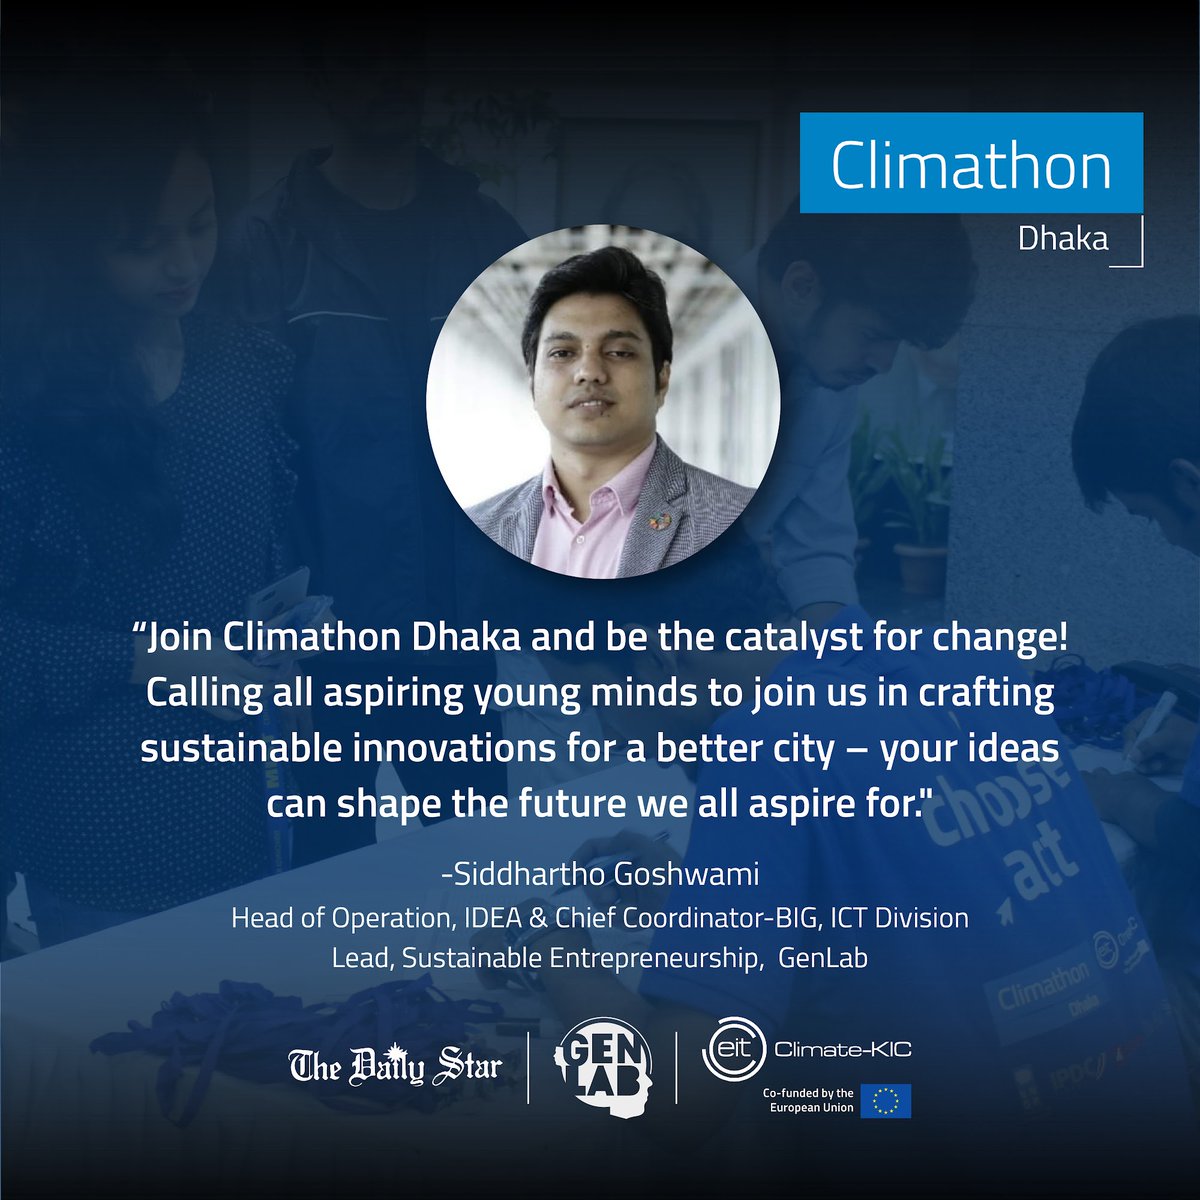 Siddhartho Goshwami Head of Operation & Chief Coordinator-BIG, IDEA-ICT Division and Lead of Sustainable Entrepreneurship, GenLab calling aspiring youth to join Climathon Dhaka and innovate sustainable city structure for a better future. Registration of Climathon Dhaka is LIVE!